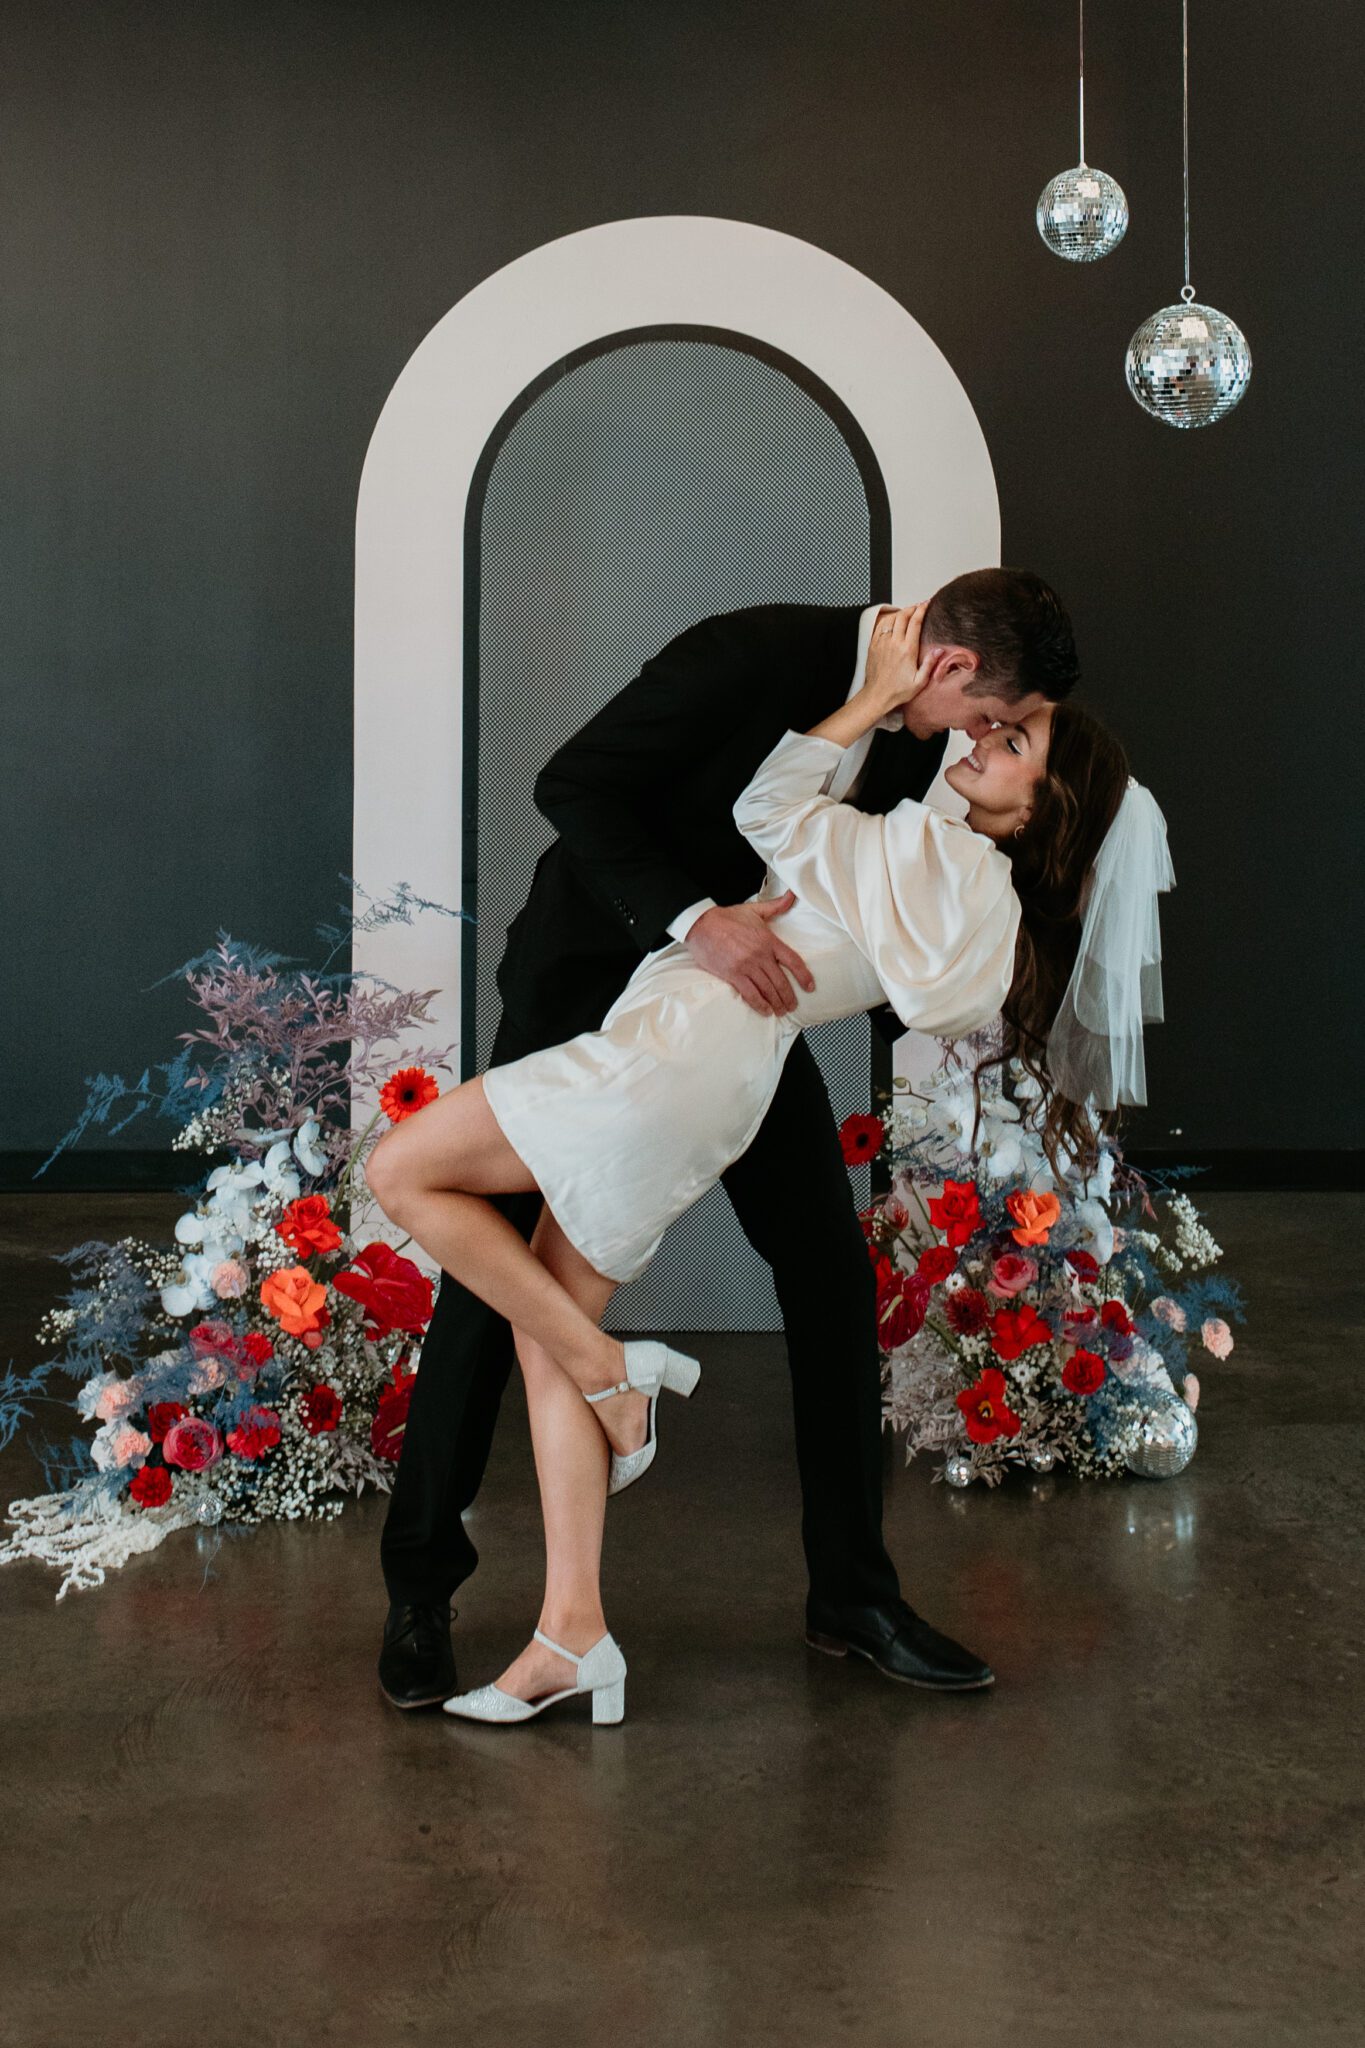 Couple kisses during bold retro-inspired wedding, combining vibrant colours, sleek lines, and nostalgic elements for a unique celebration.